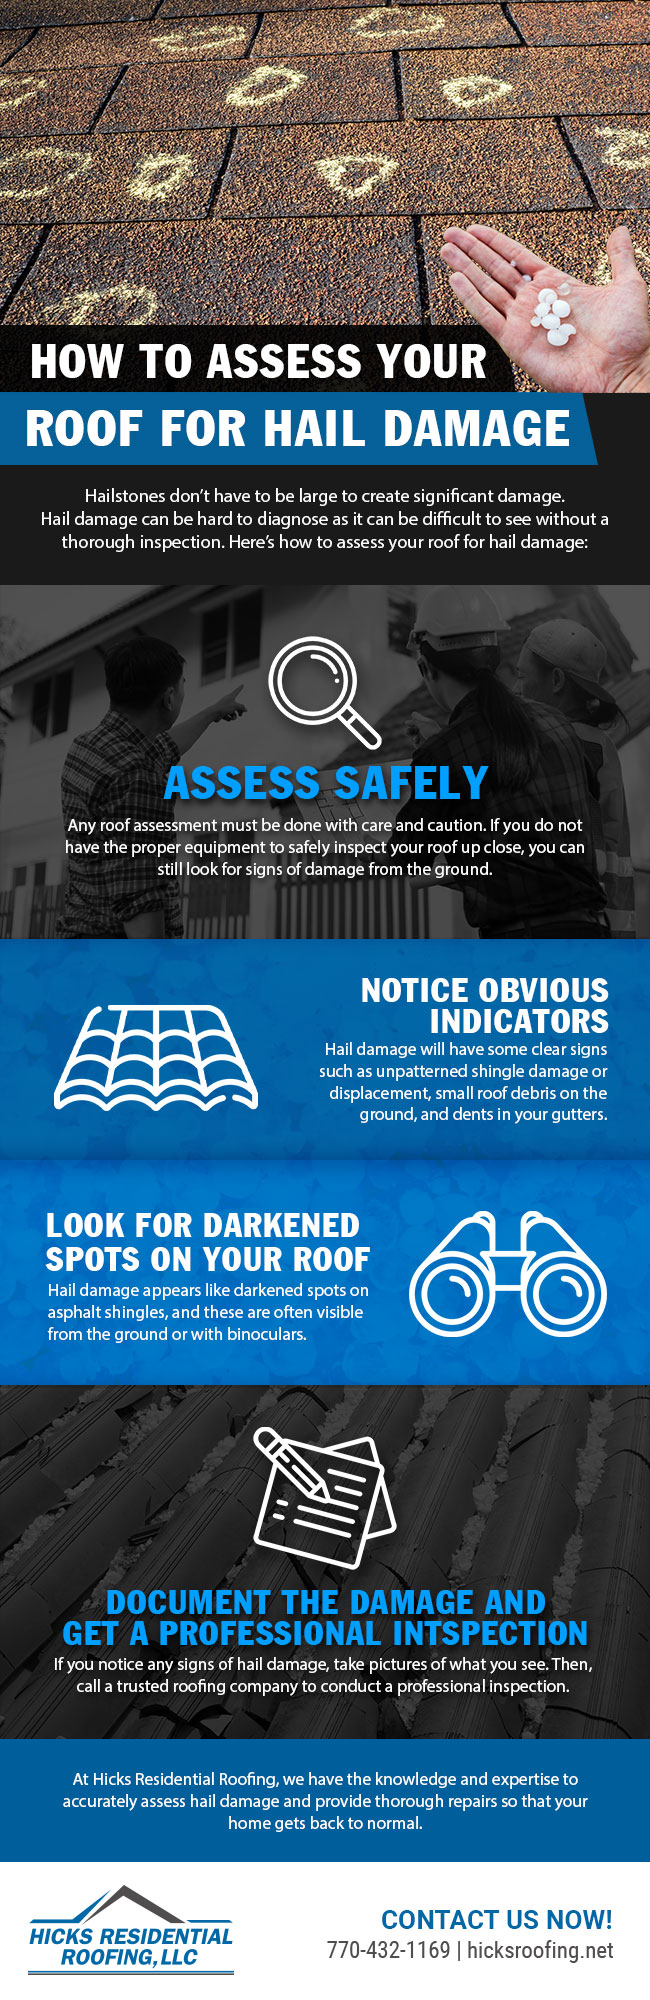 How to Assess Your Roof for Hail Damage 